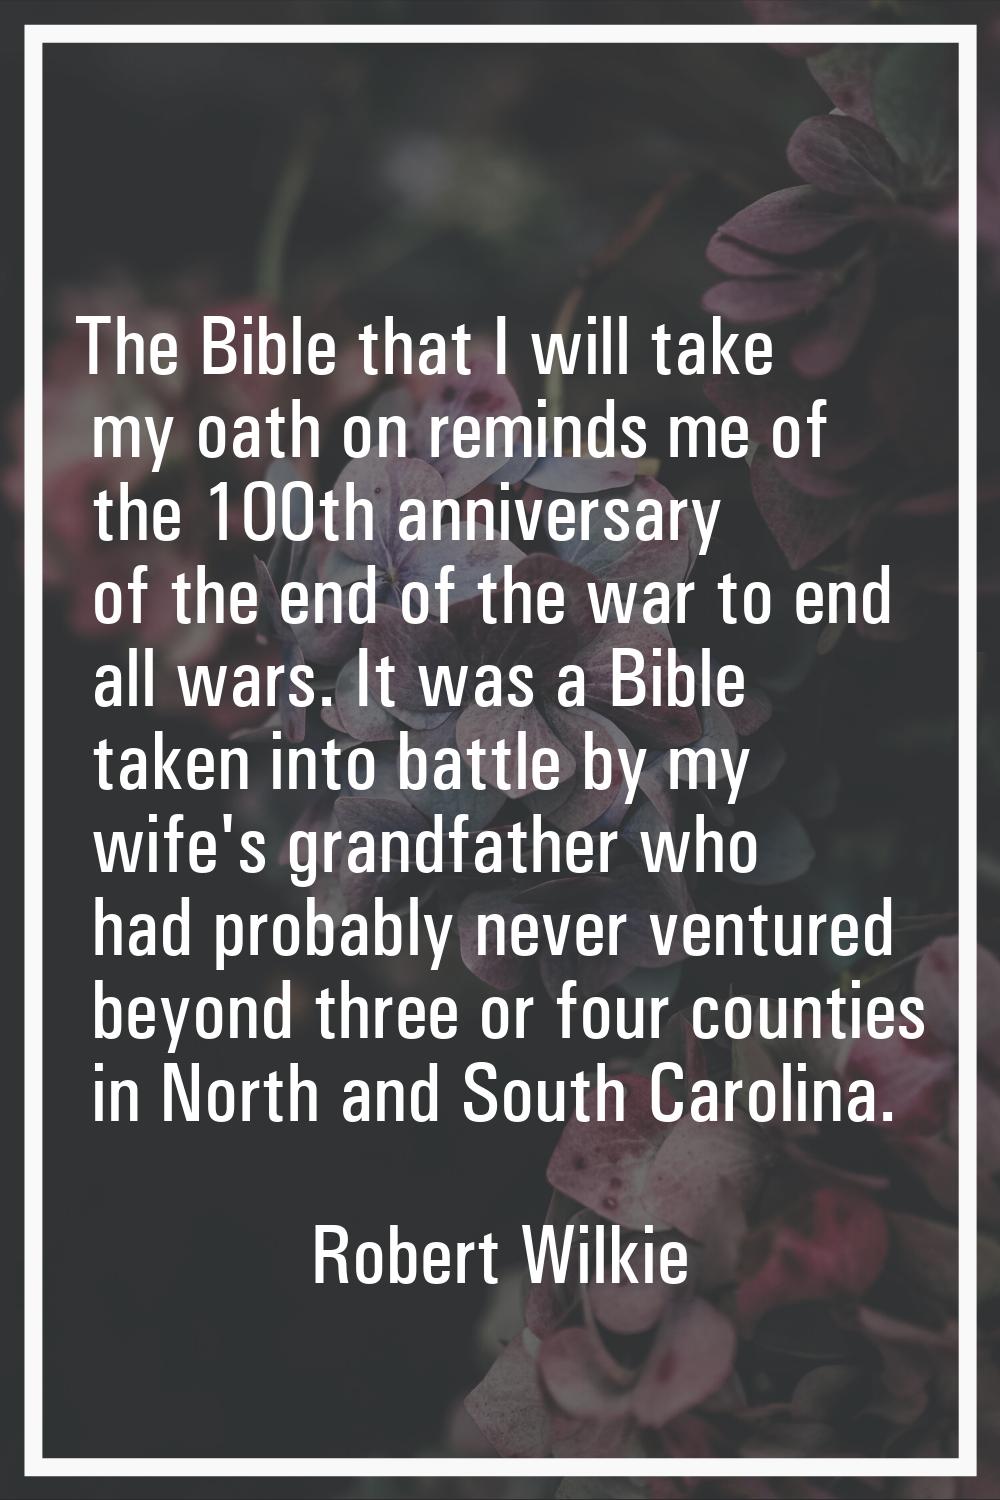 The Bible that I will take my oath on reminds me of the 100th anniversary of the end of the war to 